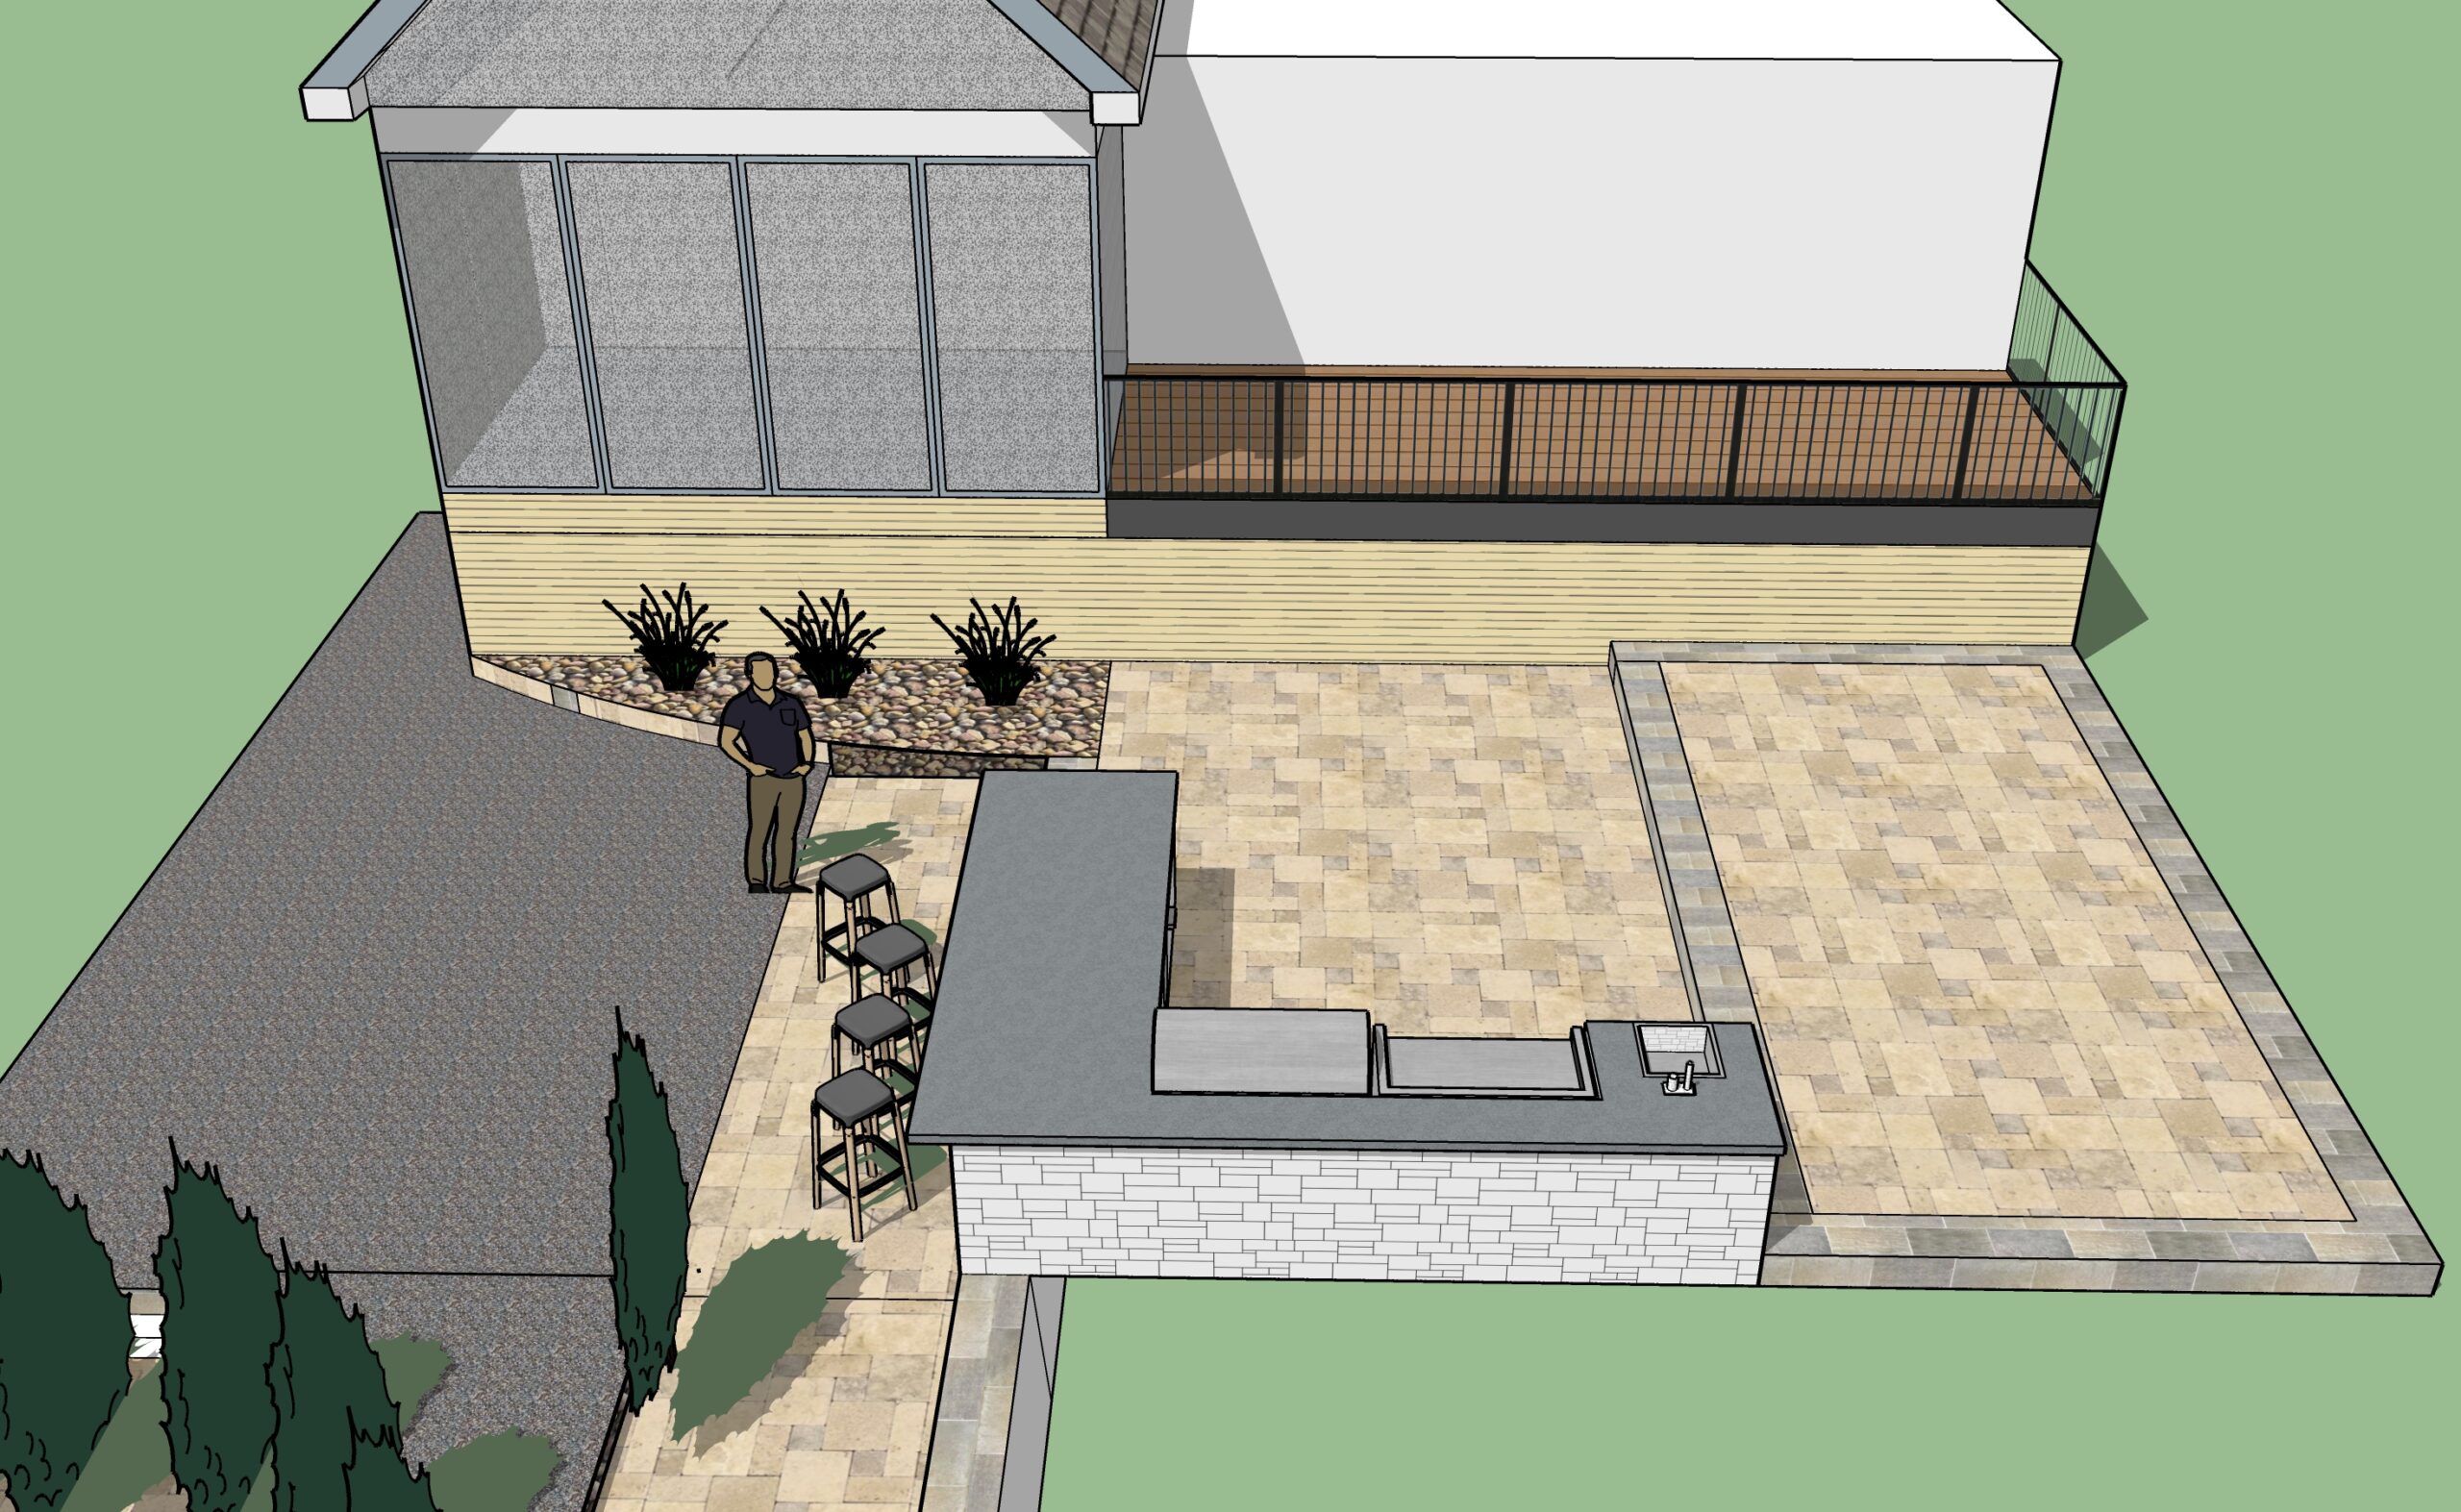 A 3d rendering of a house with a patio area.